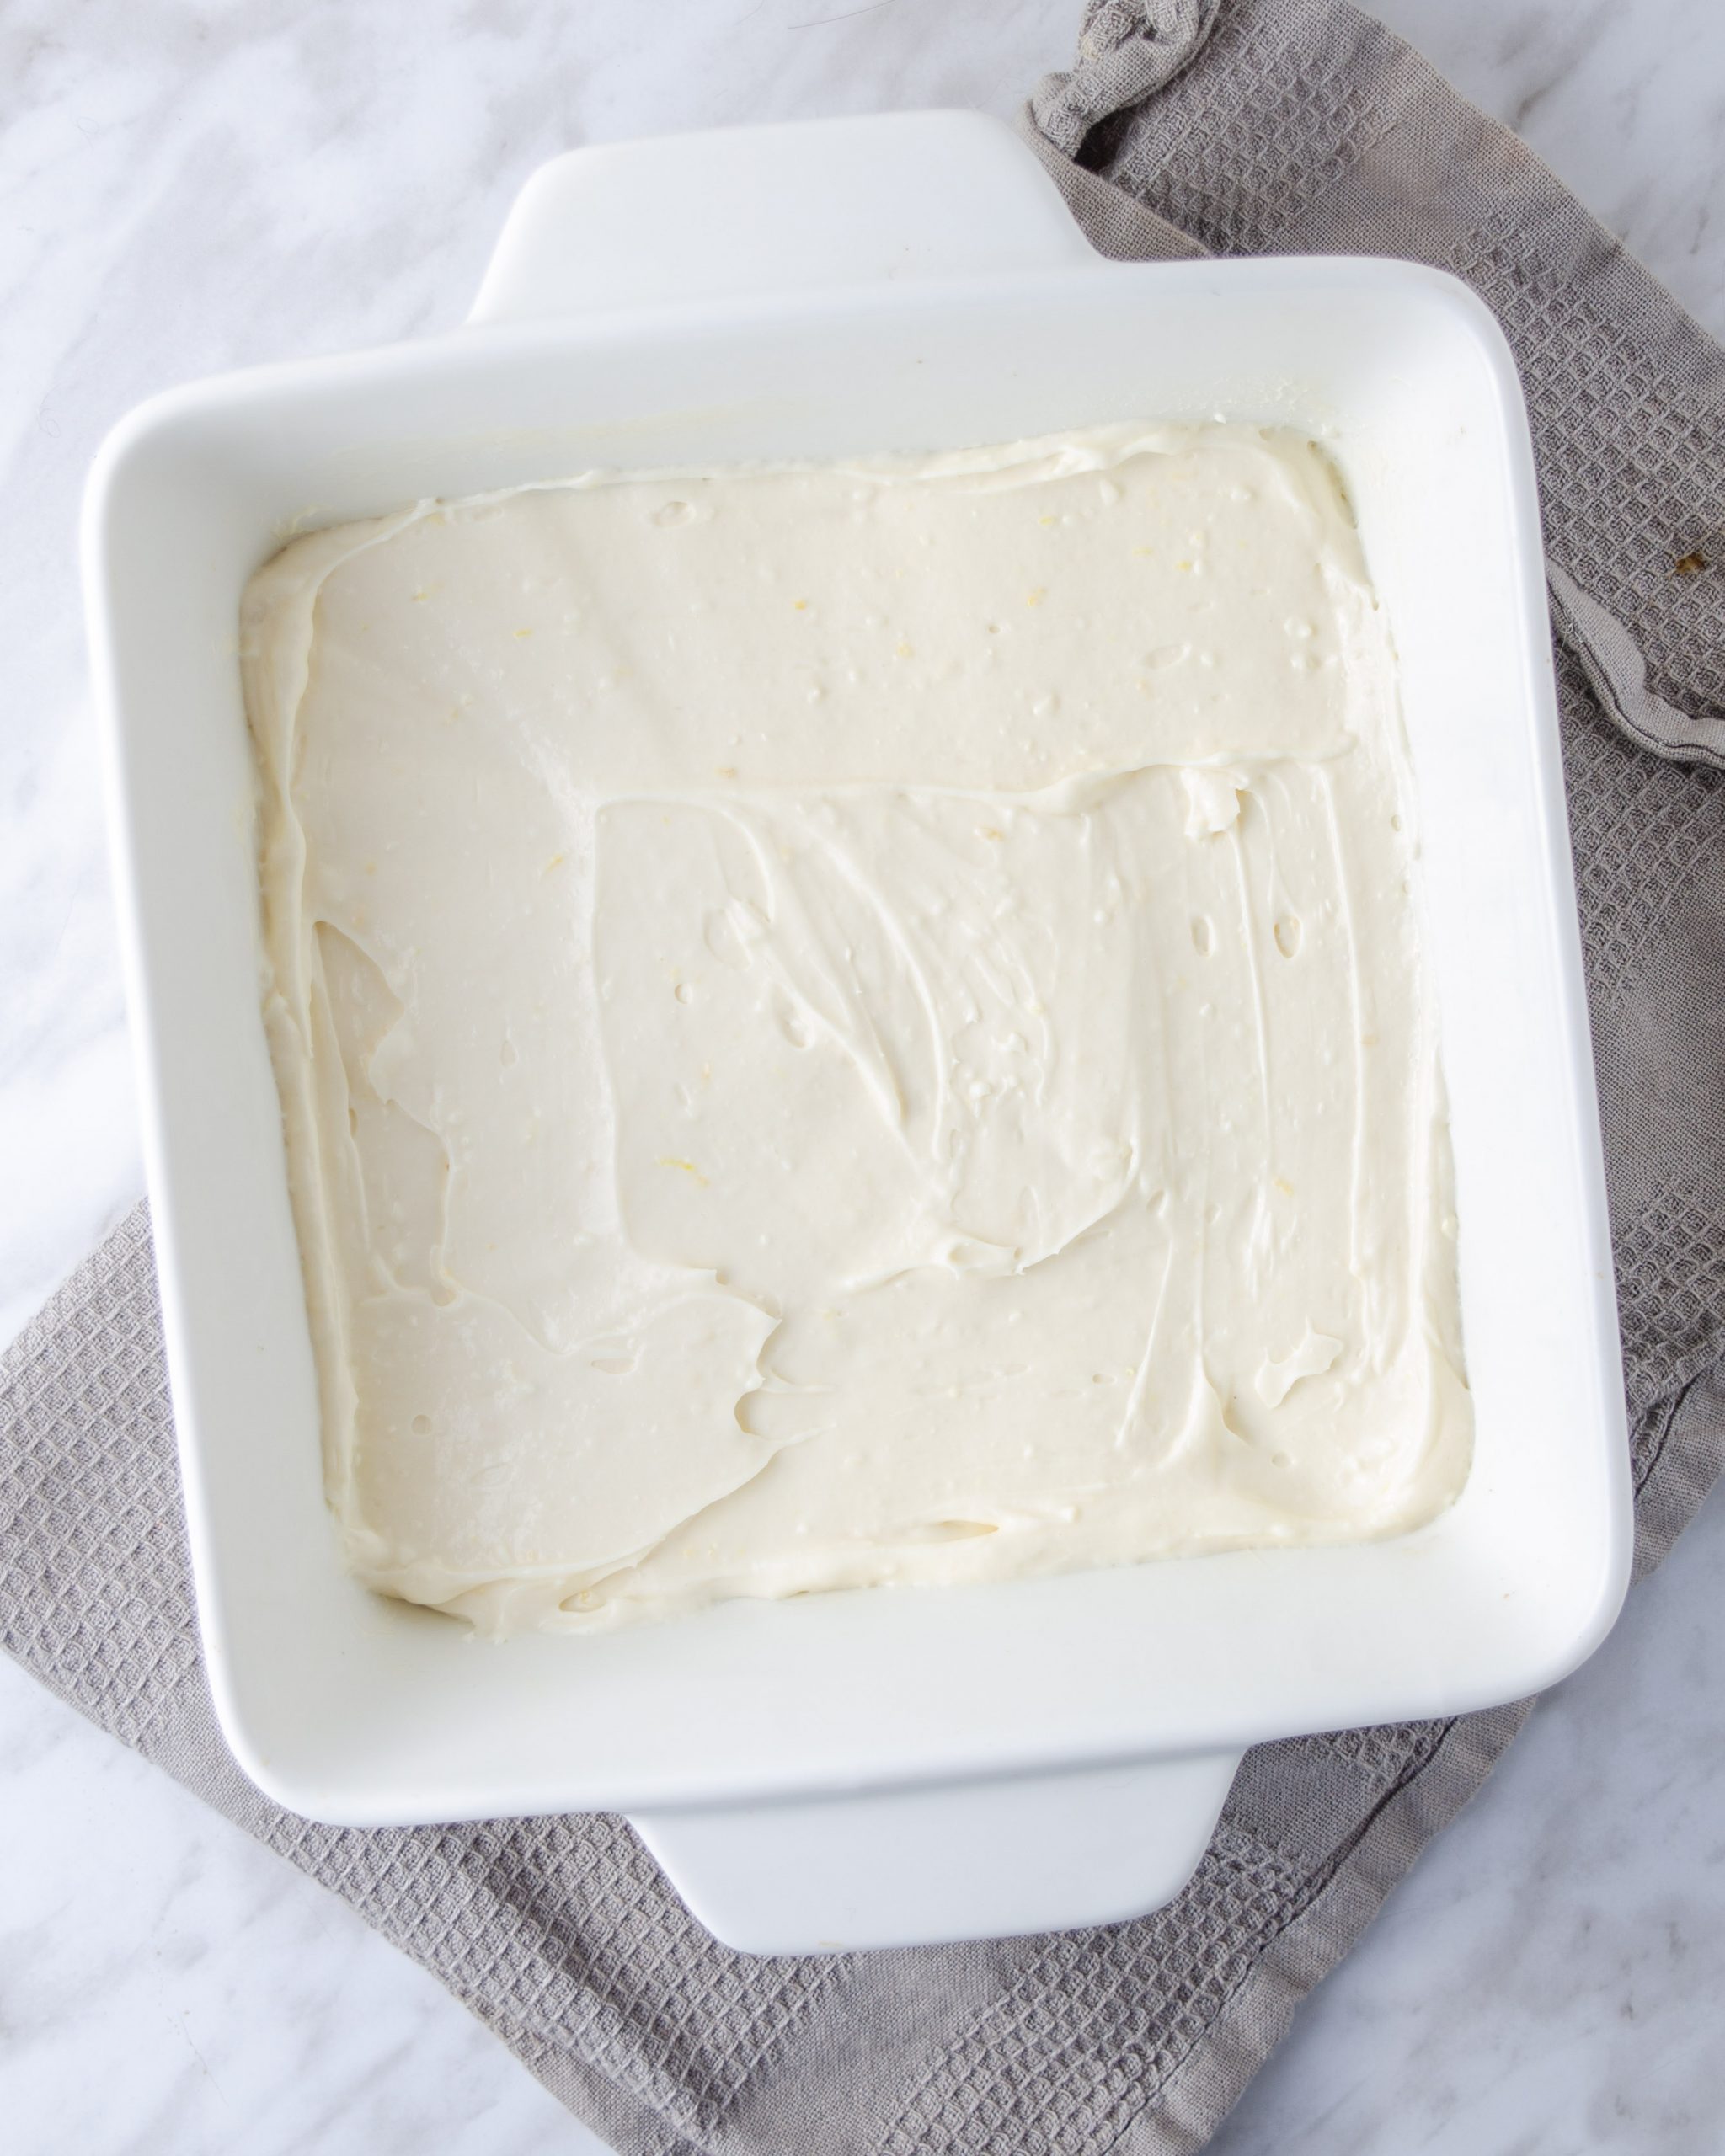 Spread the cream cheese mixture over the layer of dough in the baking dish.